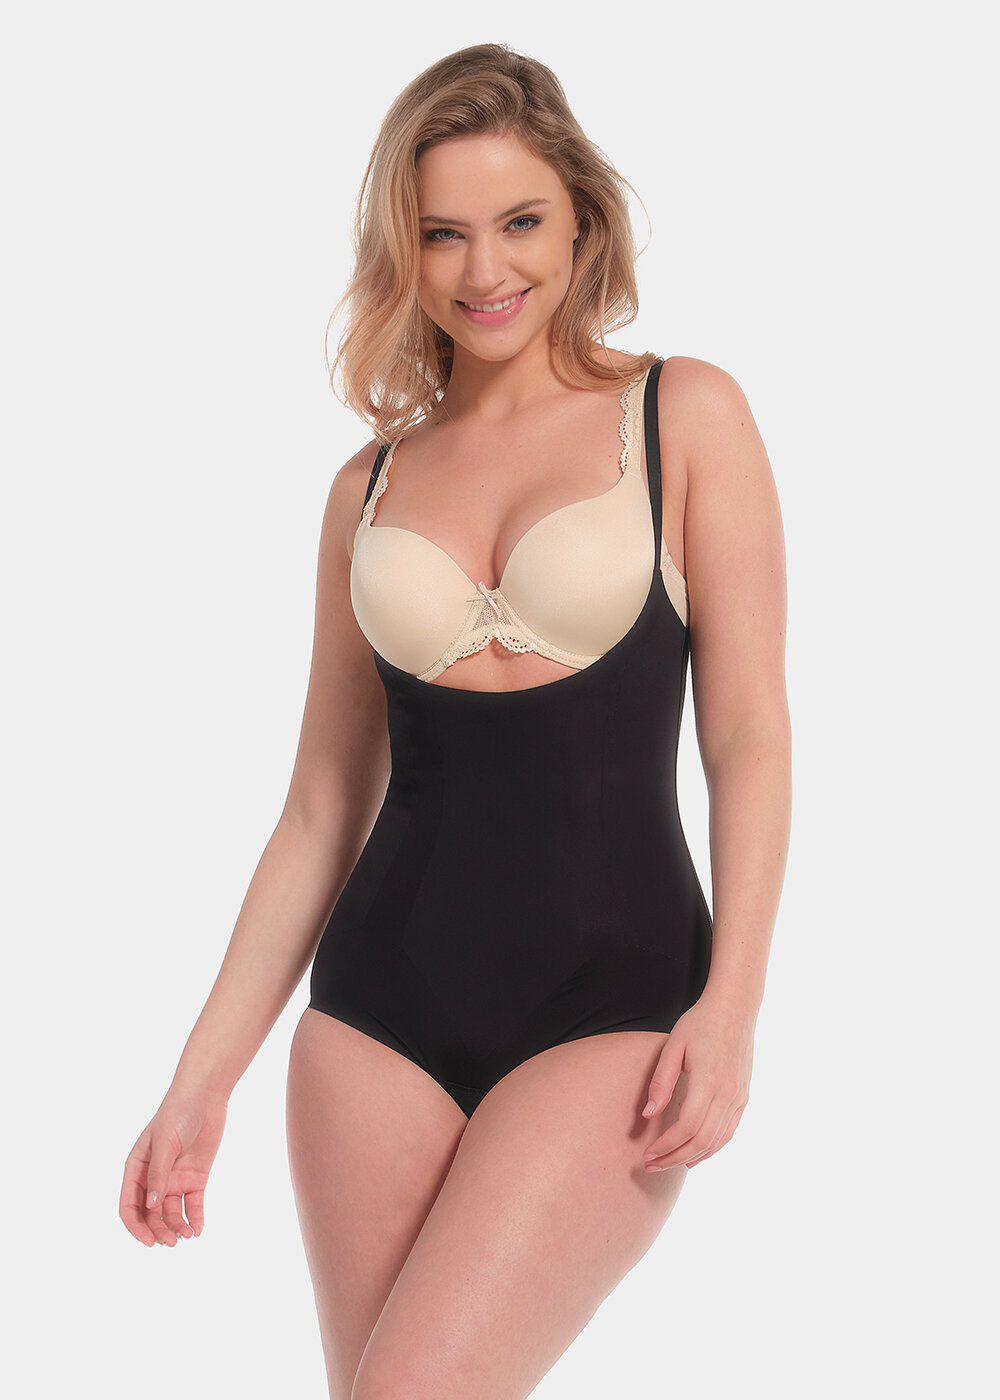 Perfect Slimmers by MAGIC Bodyfashion Women's Shaping Bodysuit